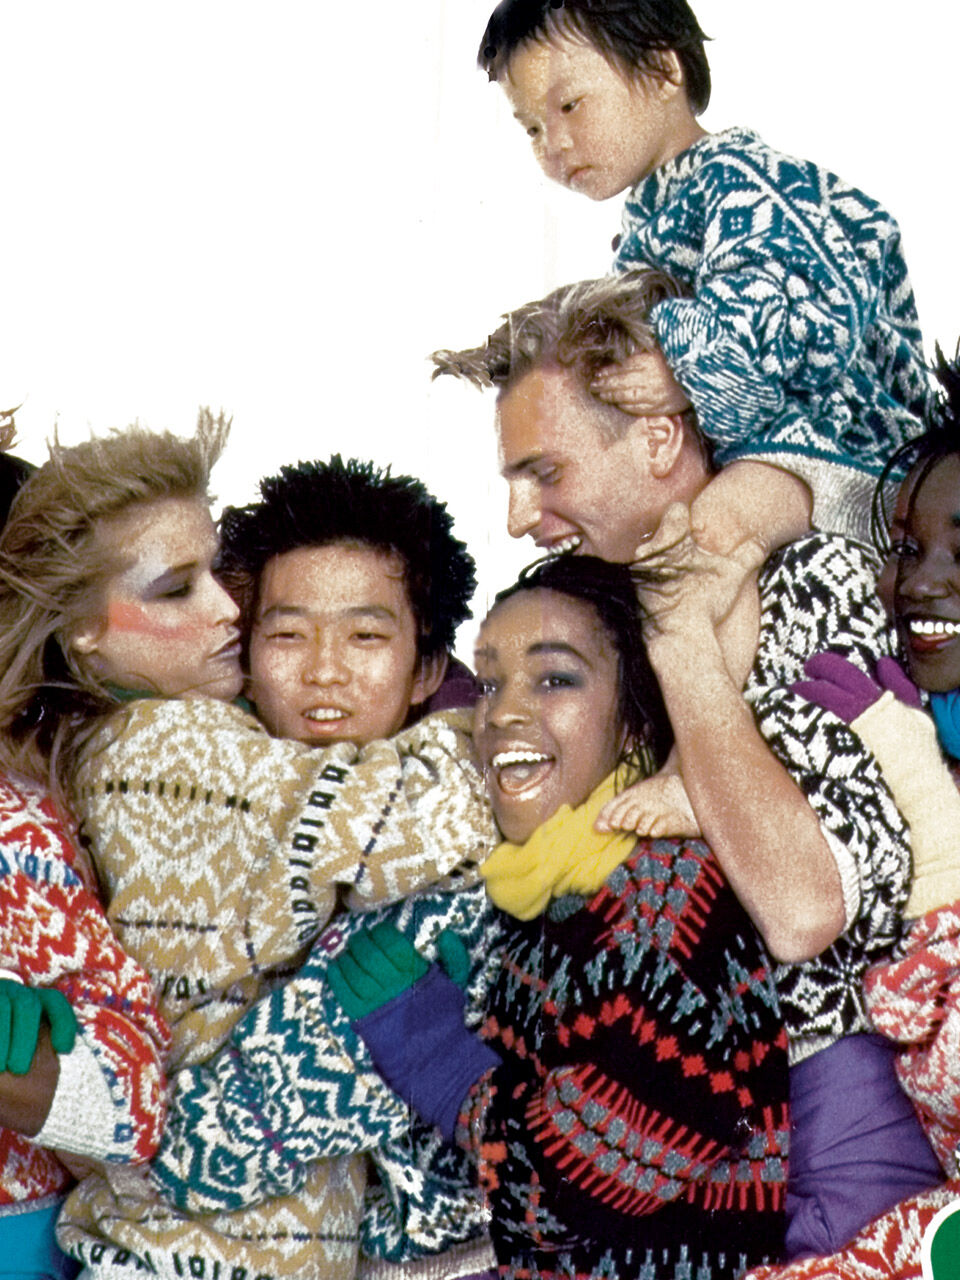 United Colors of Benetton = Equality